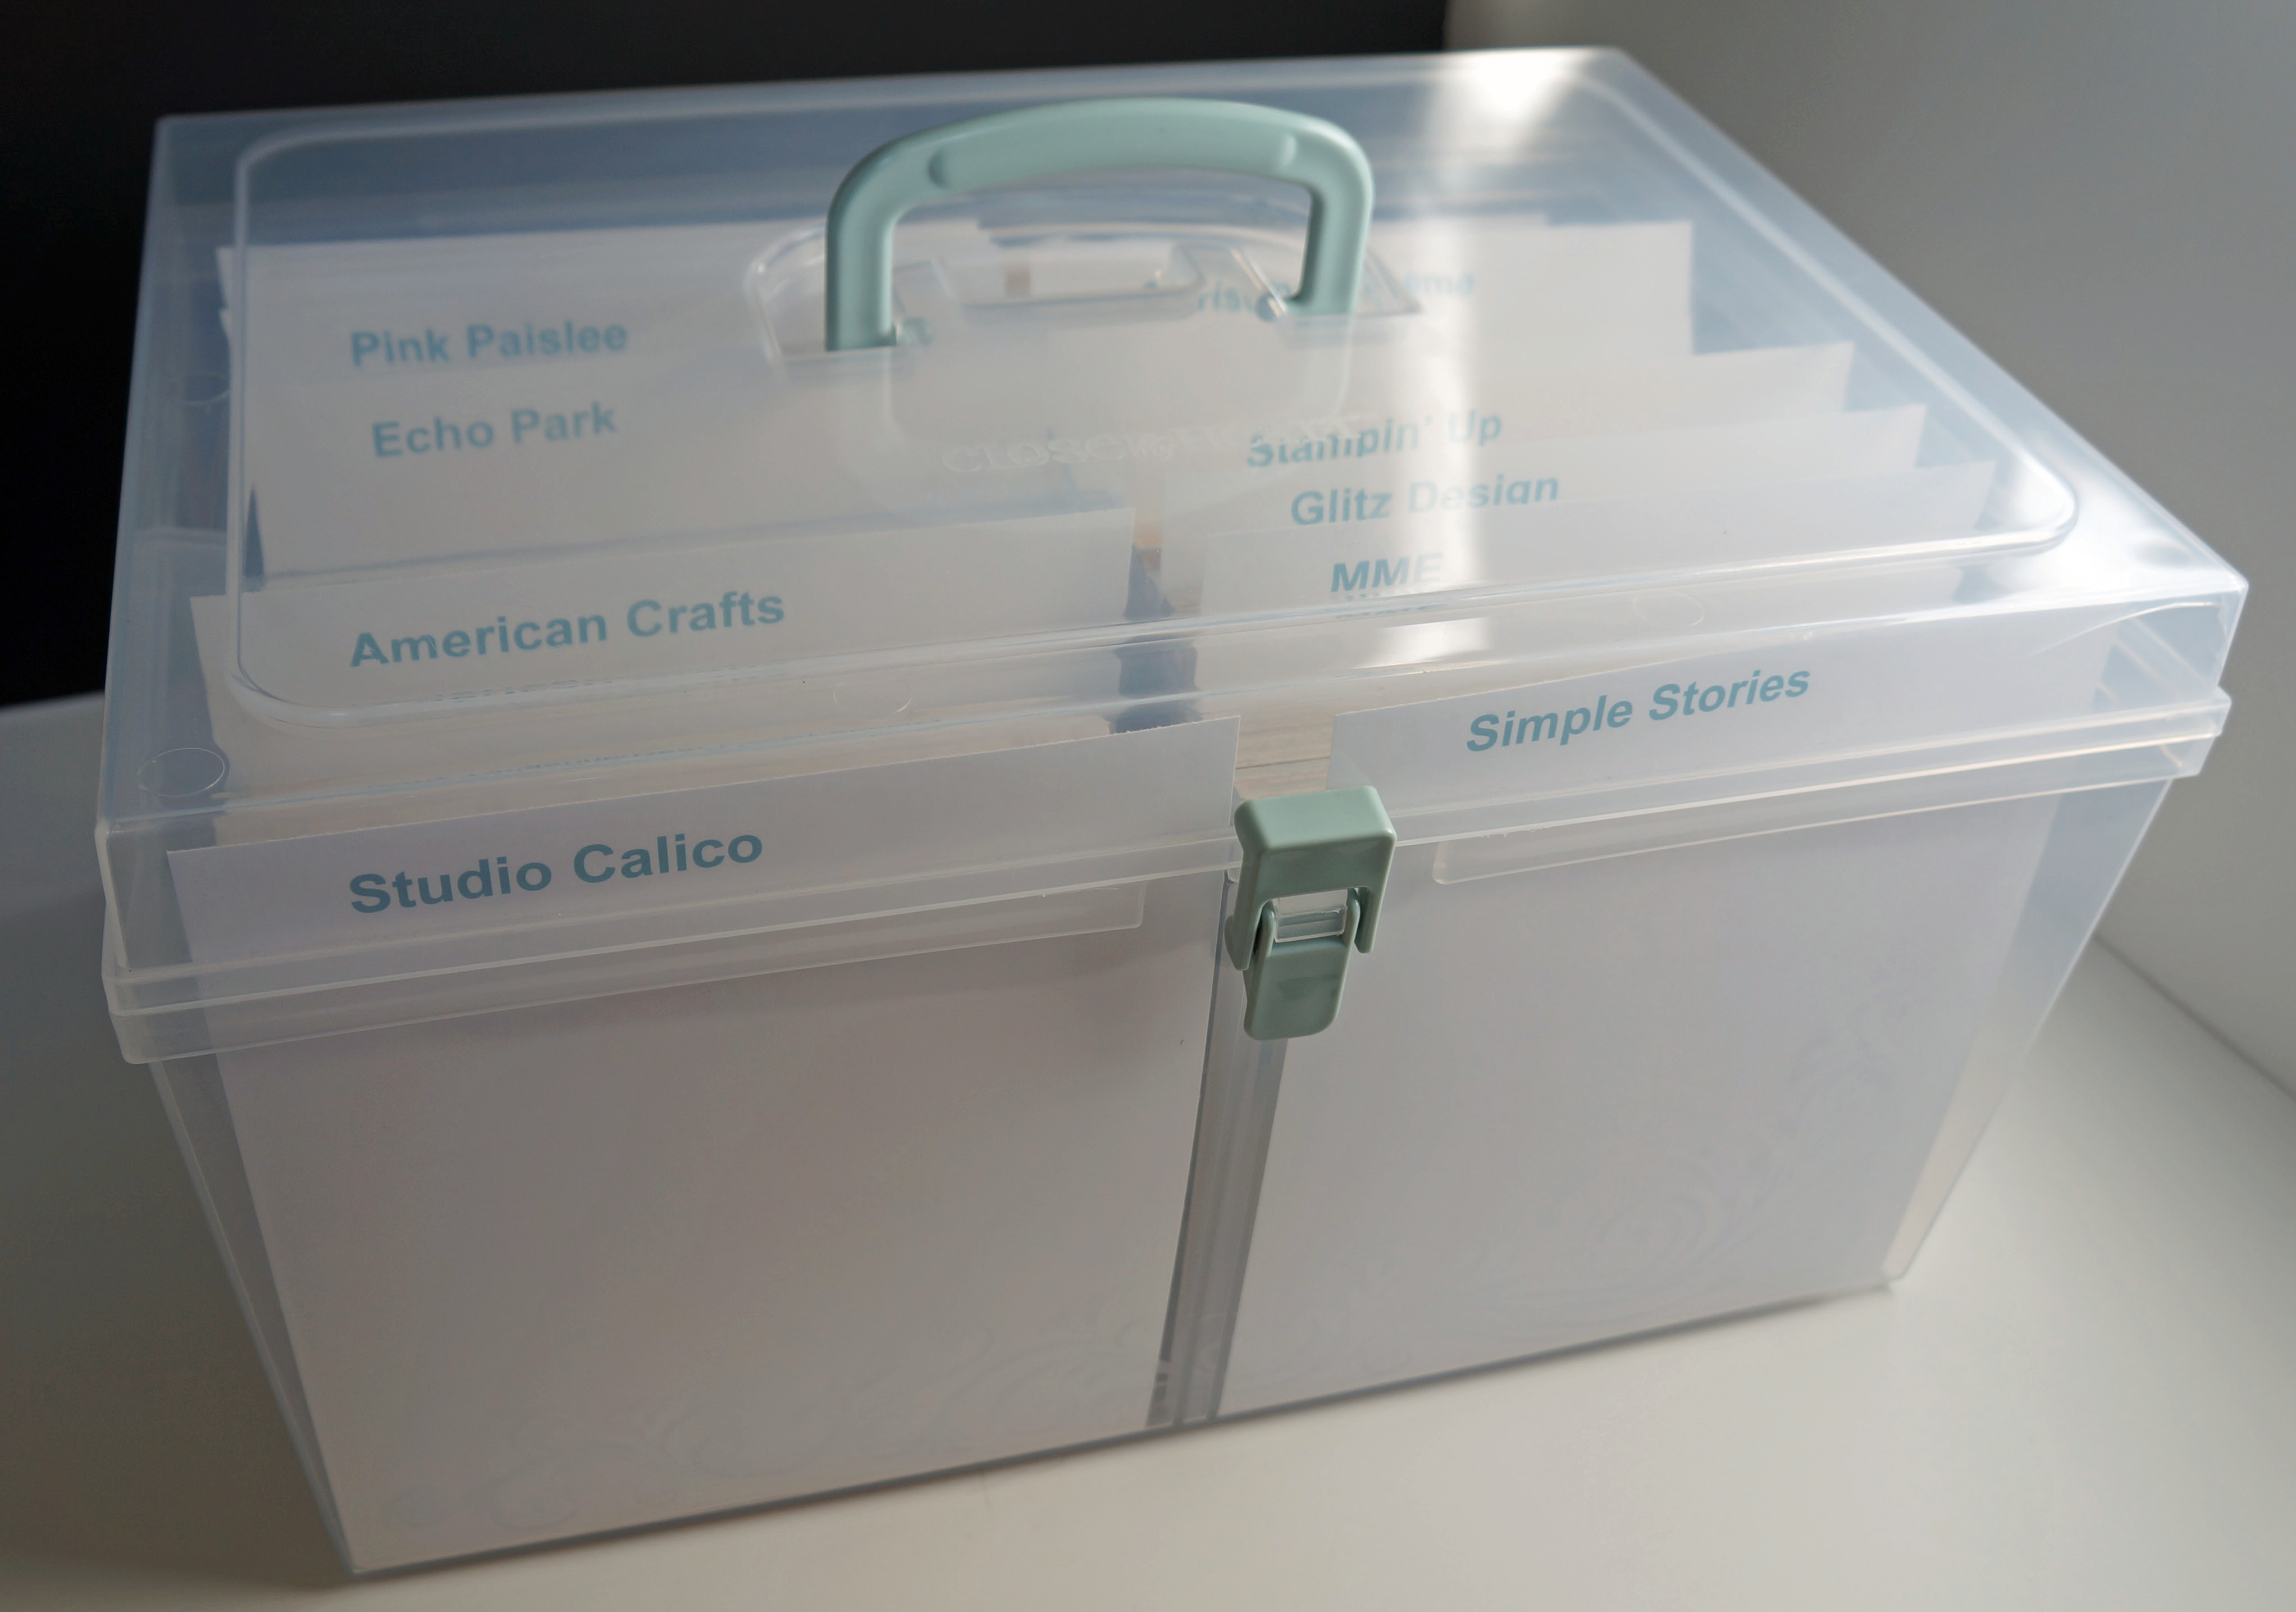 What are some ways to use large storage boxes?